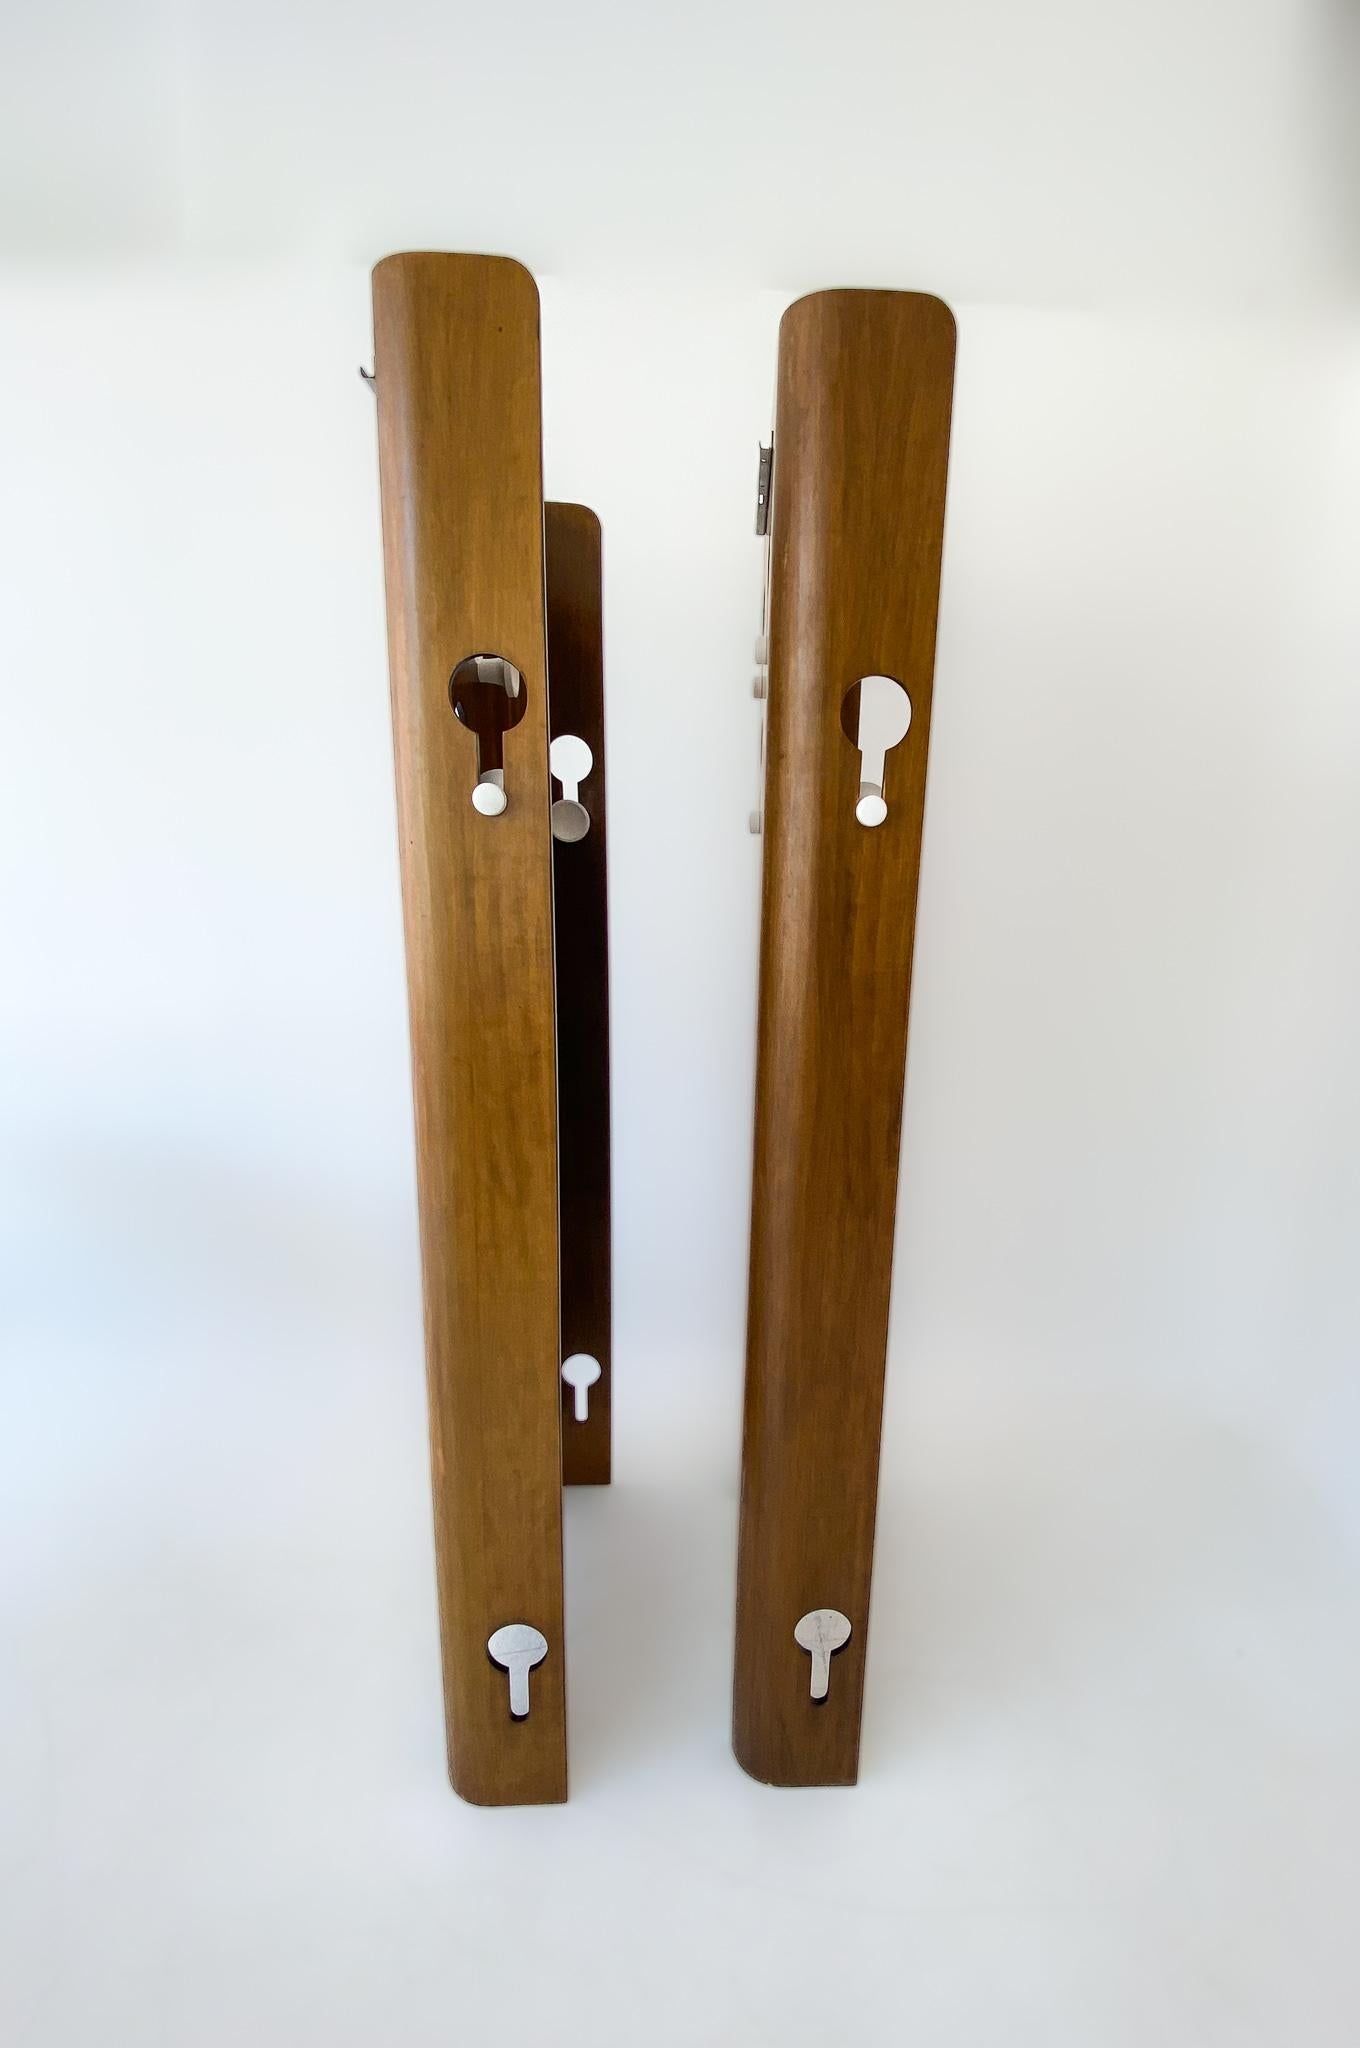 Pair of Mid-Centery Modern Coat Hangers by Carlo de Carli for Fiarm, Italy 1960s 9